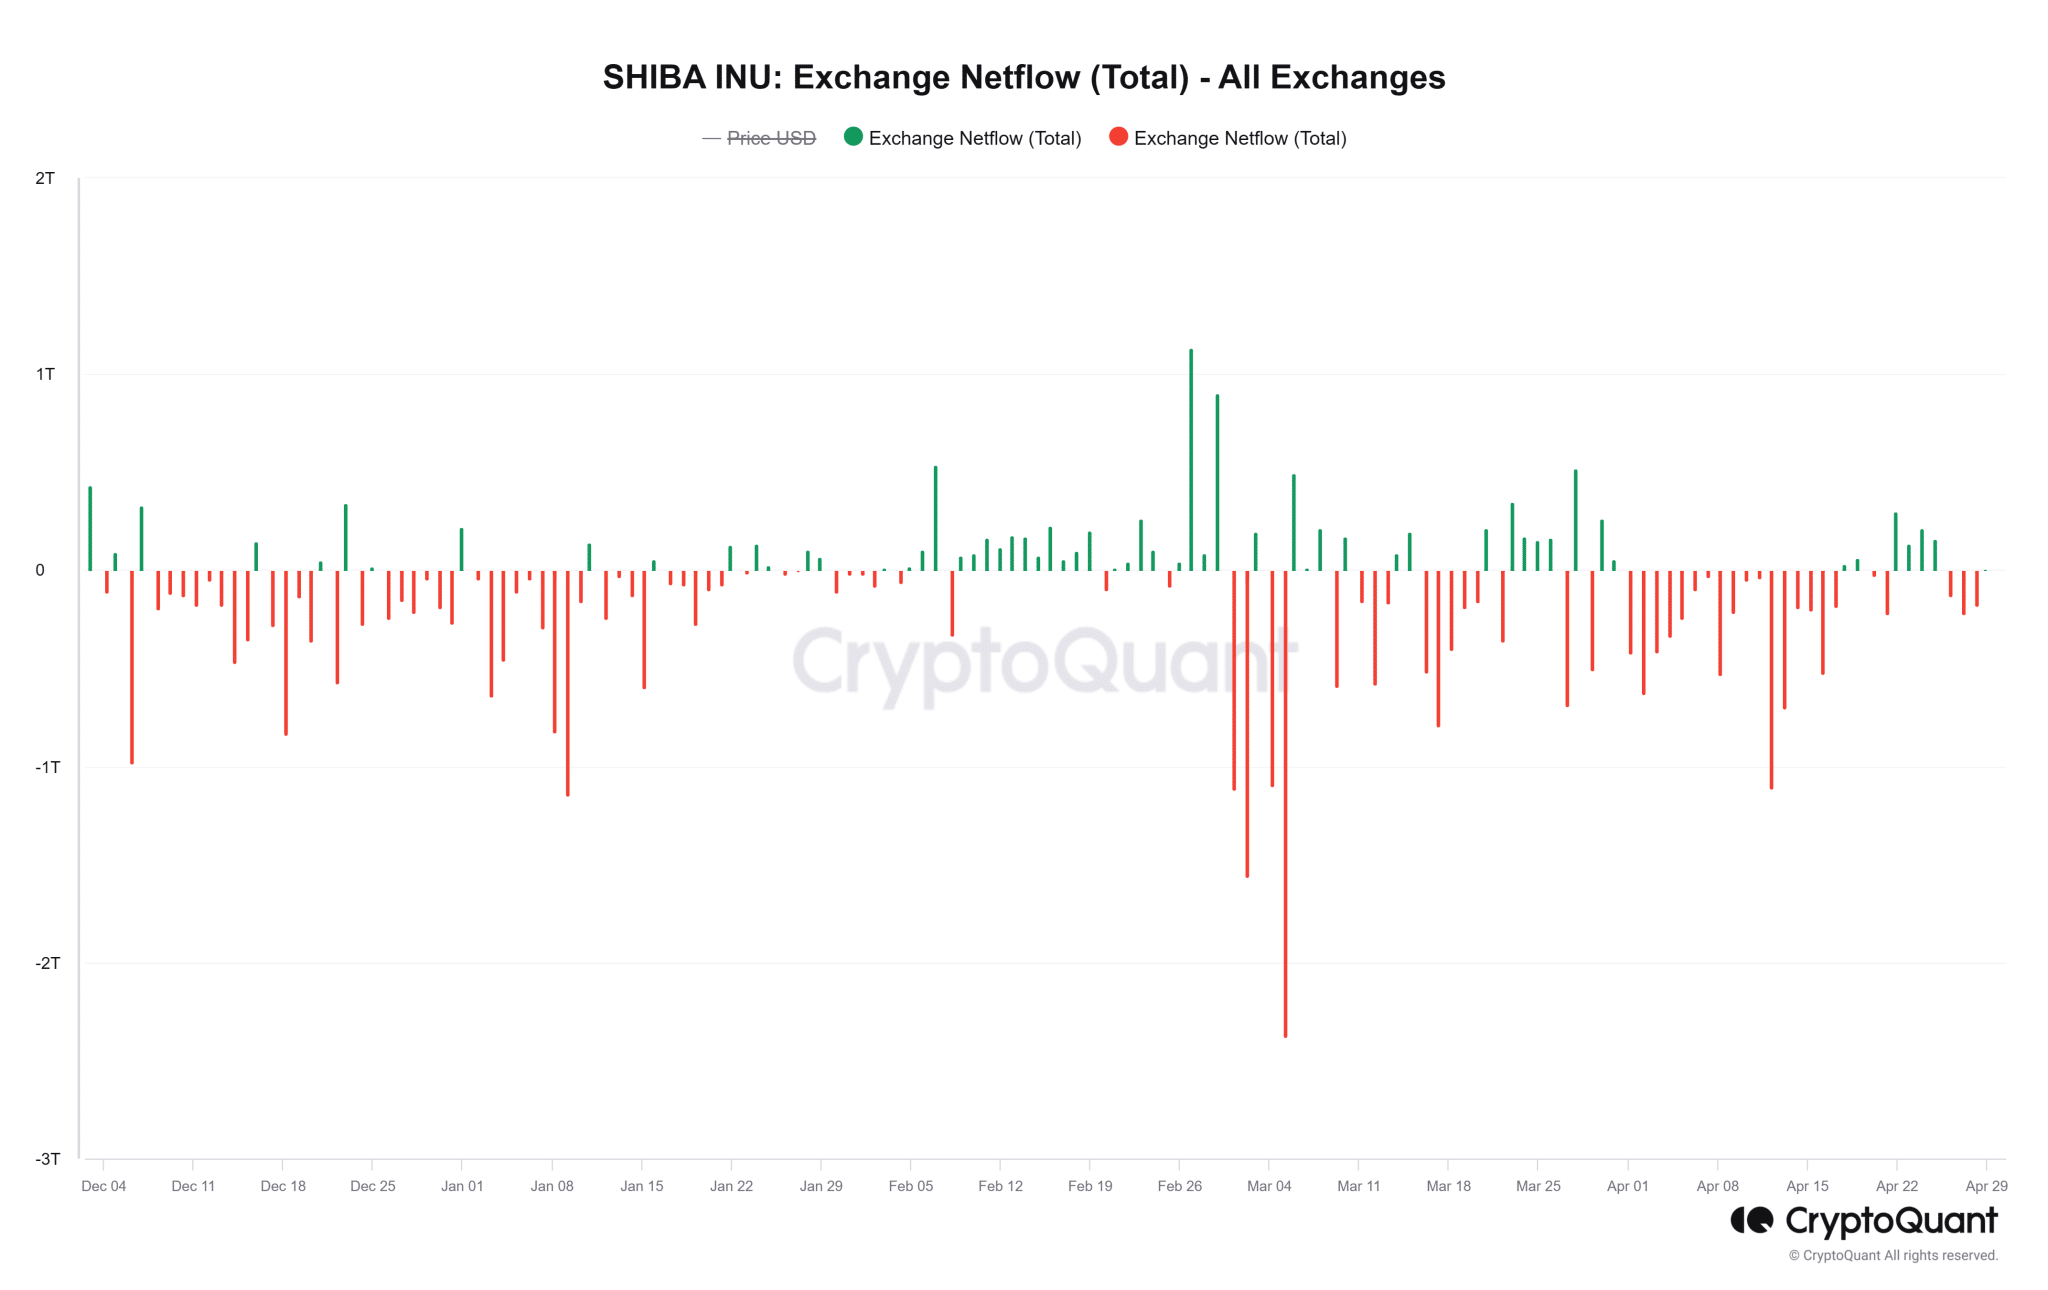 SHIBA INU Exchange Netflow Total All Exchanges